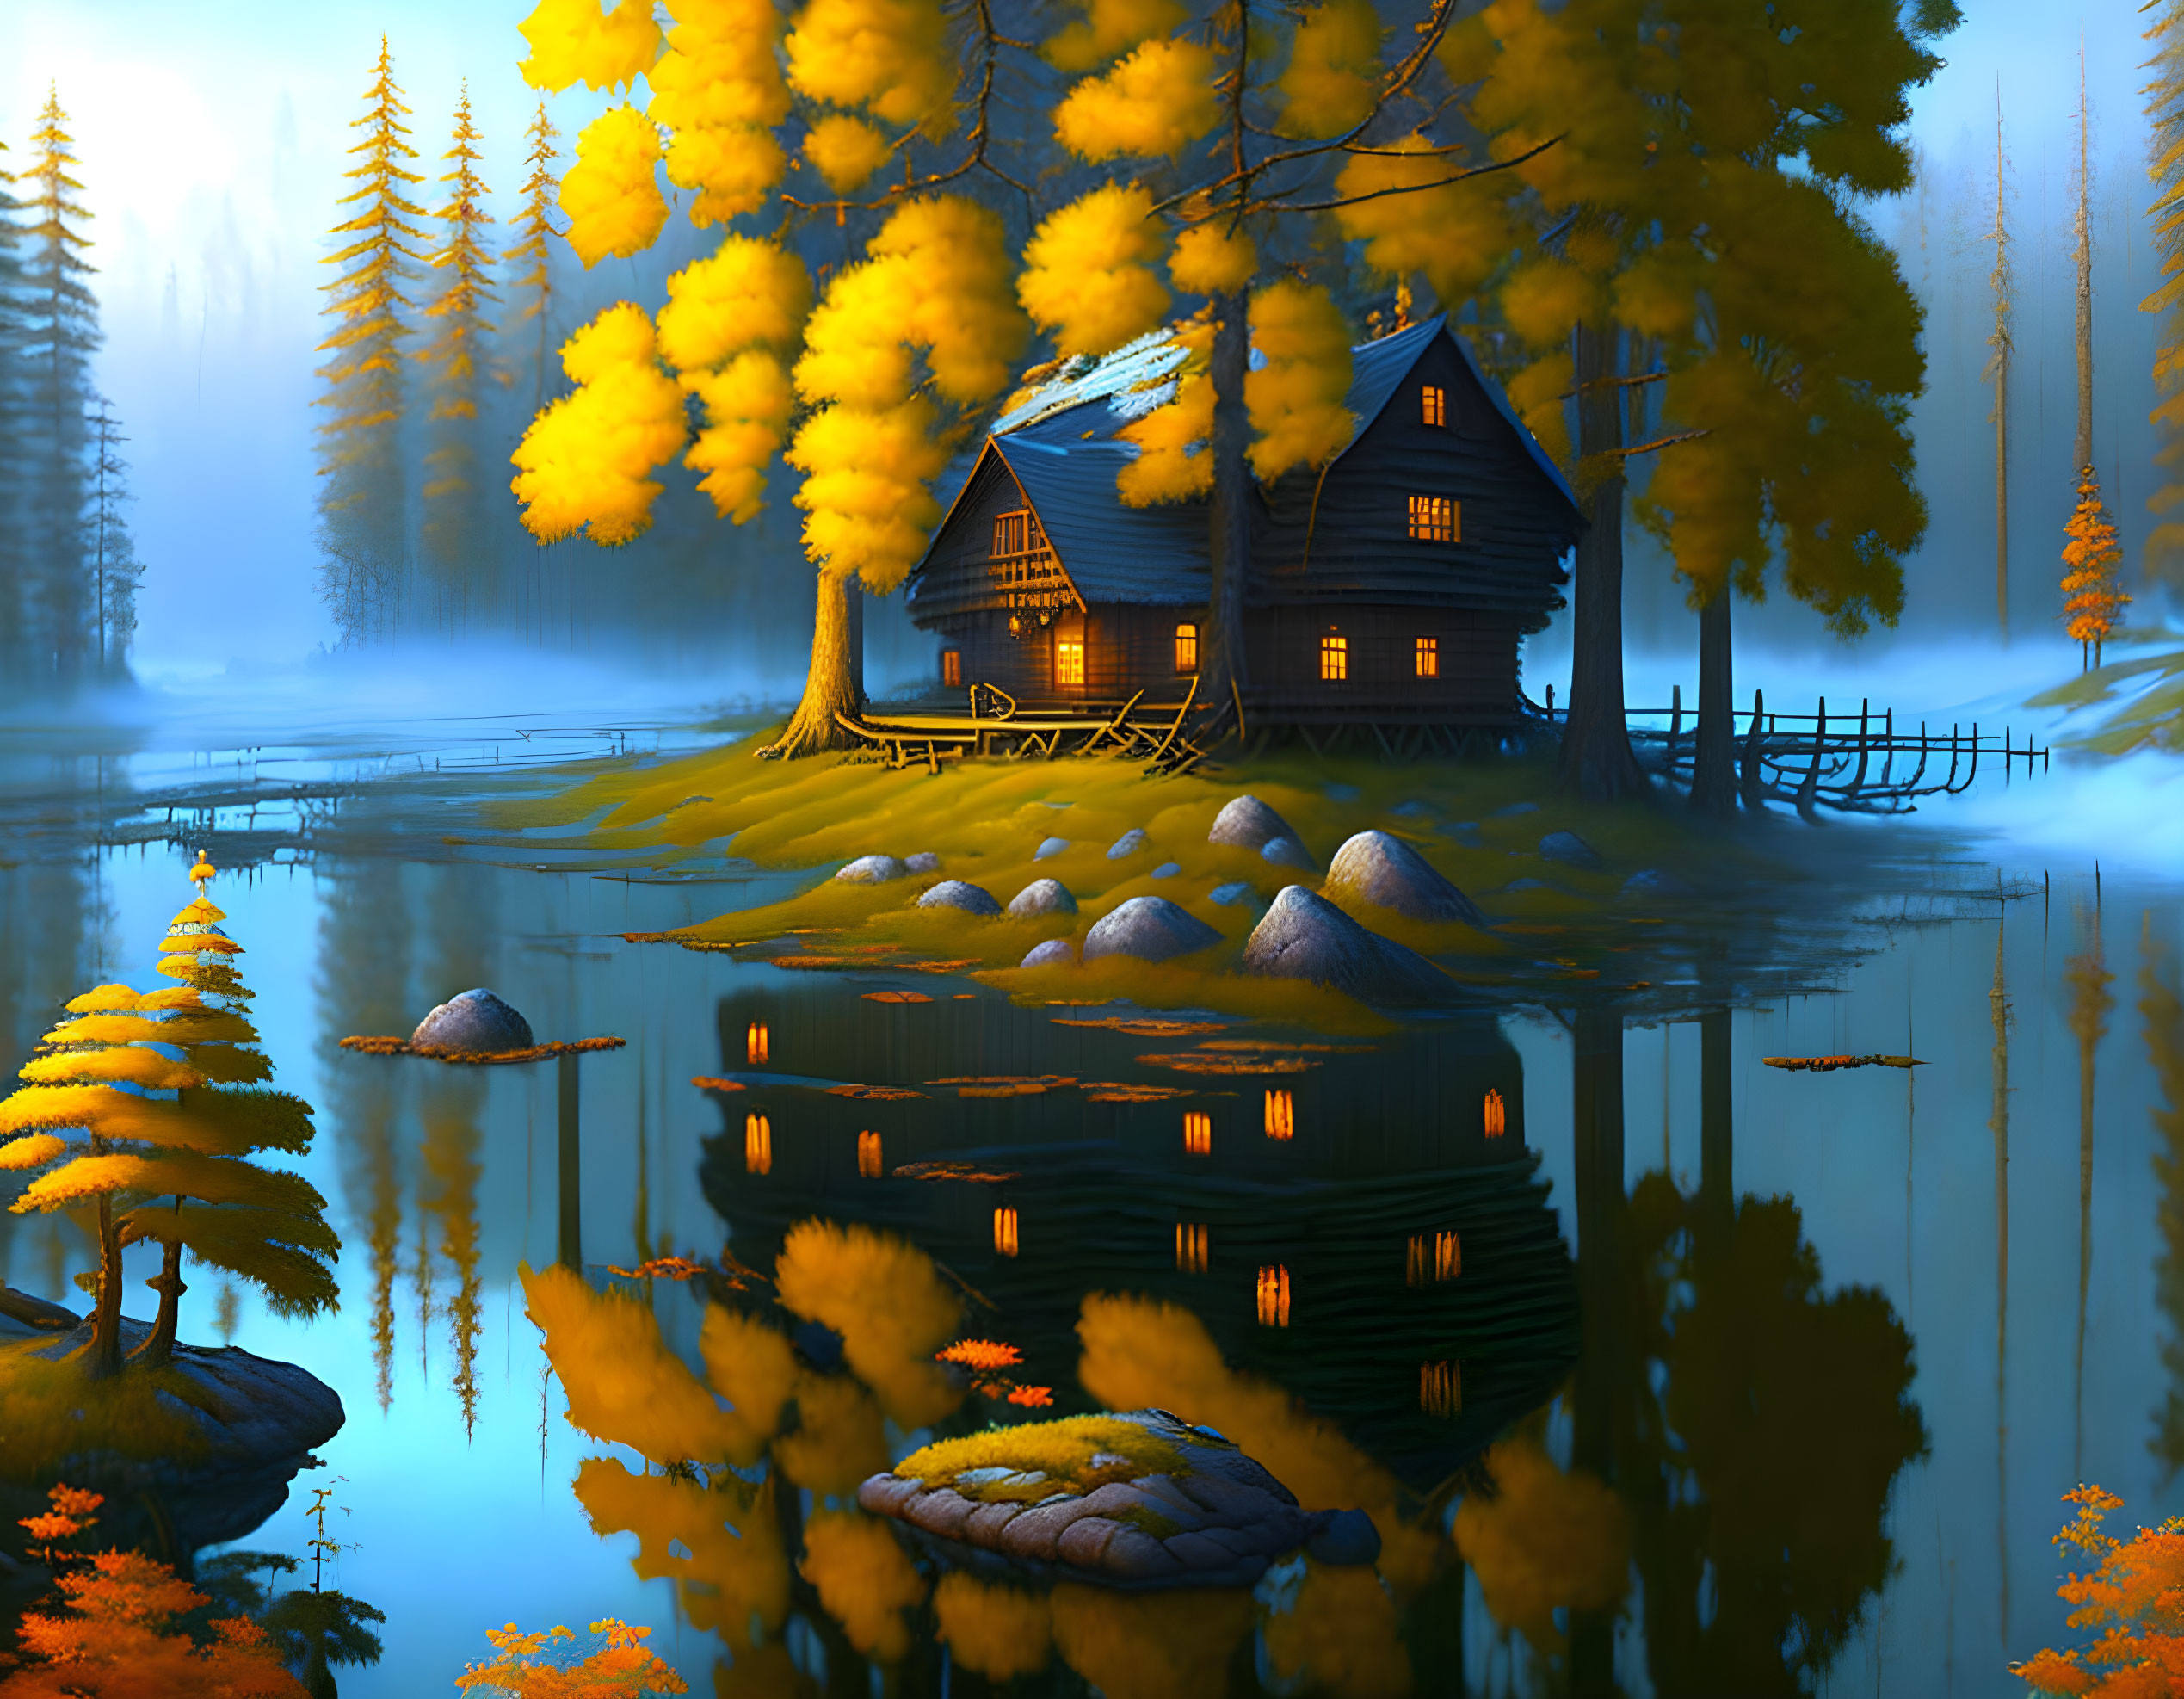 The house by the lake